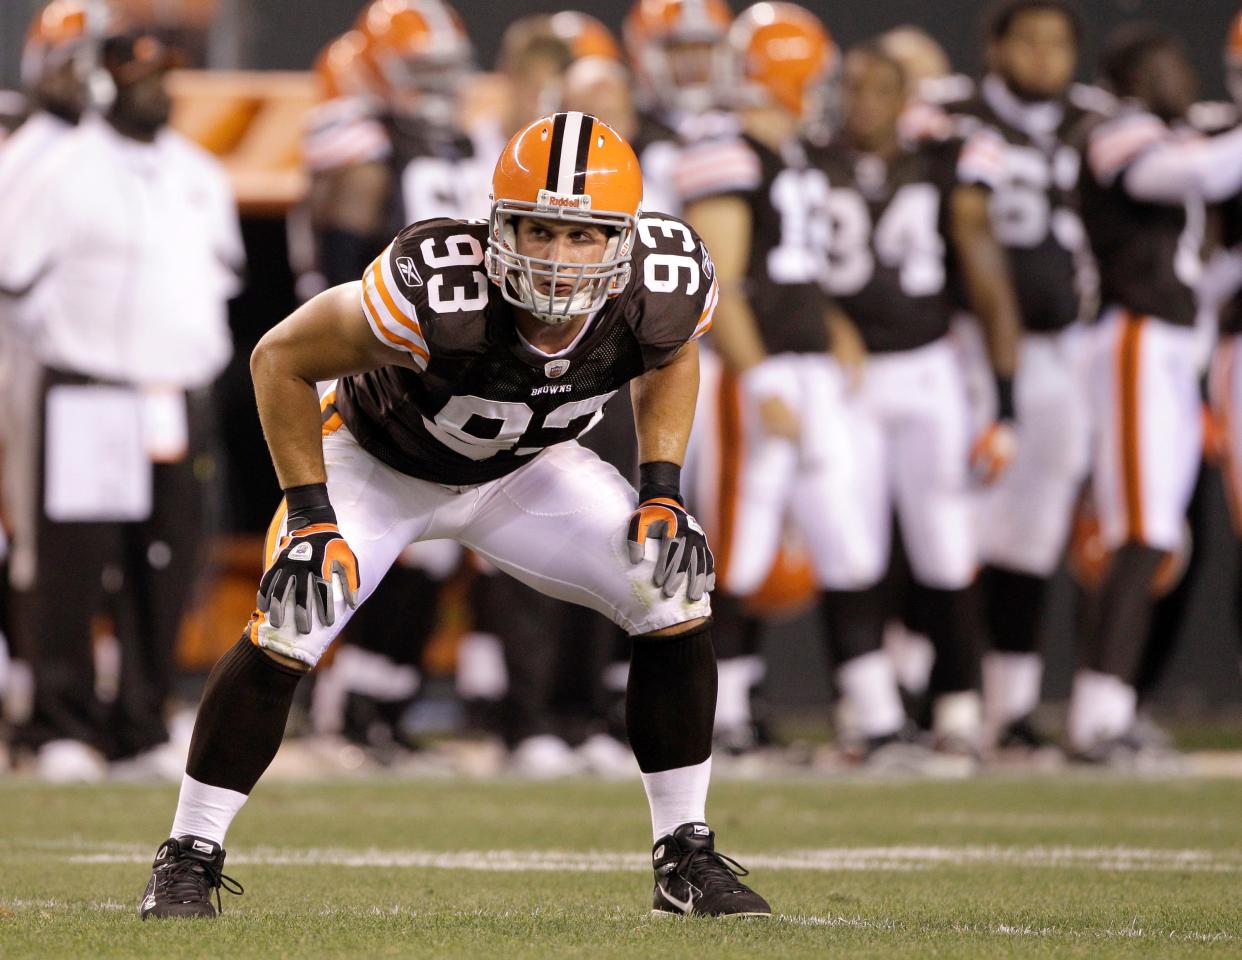 Jason Trusnik playing for the Cleveland Browns on Sept. 2, 2010, in Cleveland. (AP Photo/Amy Sancetta)